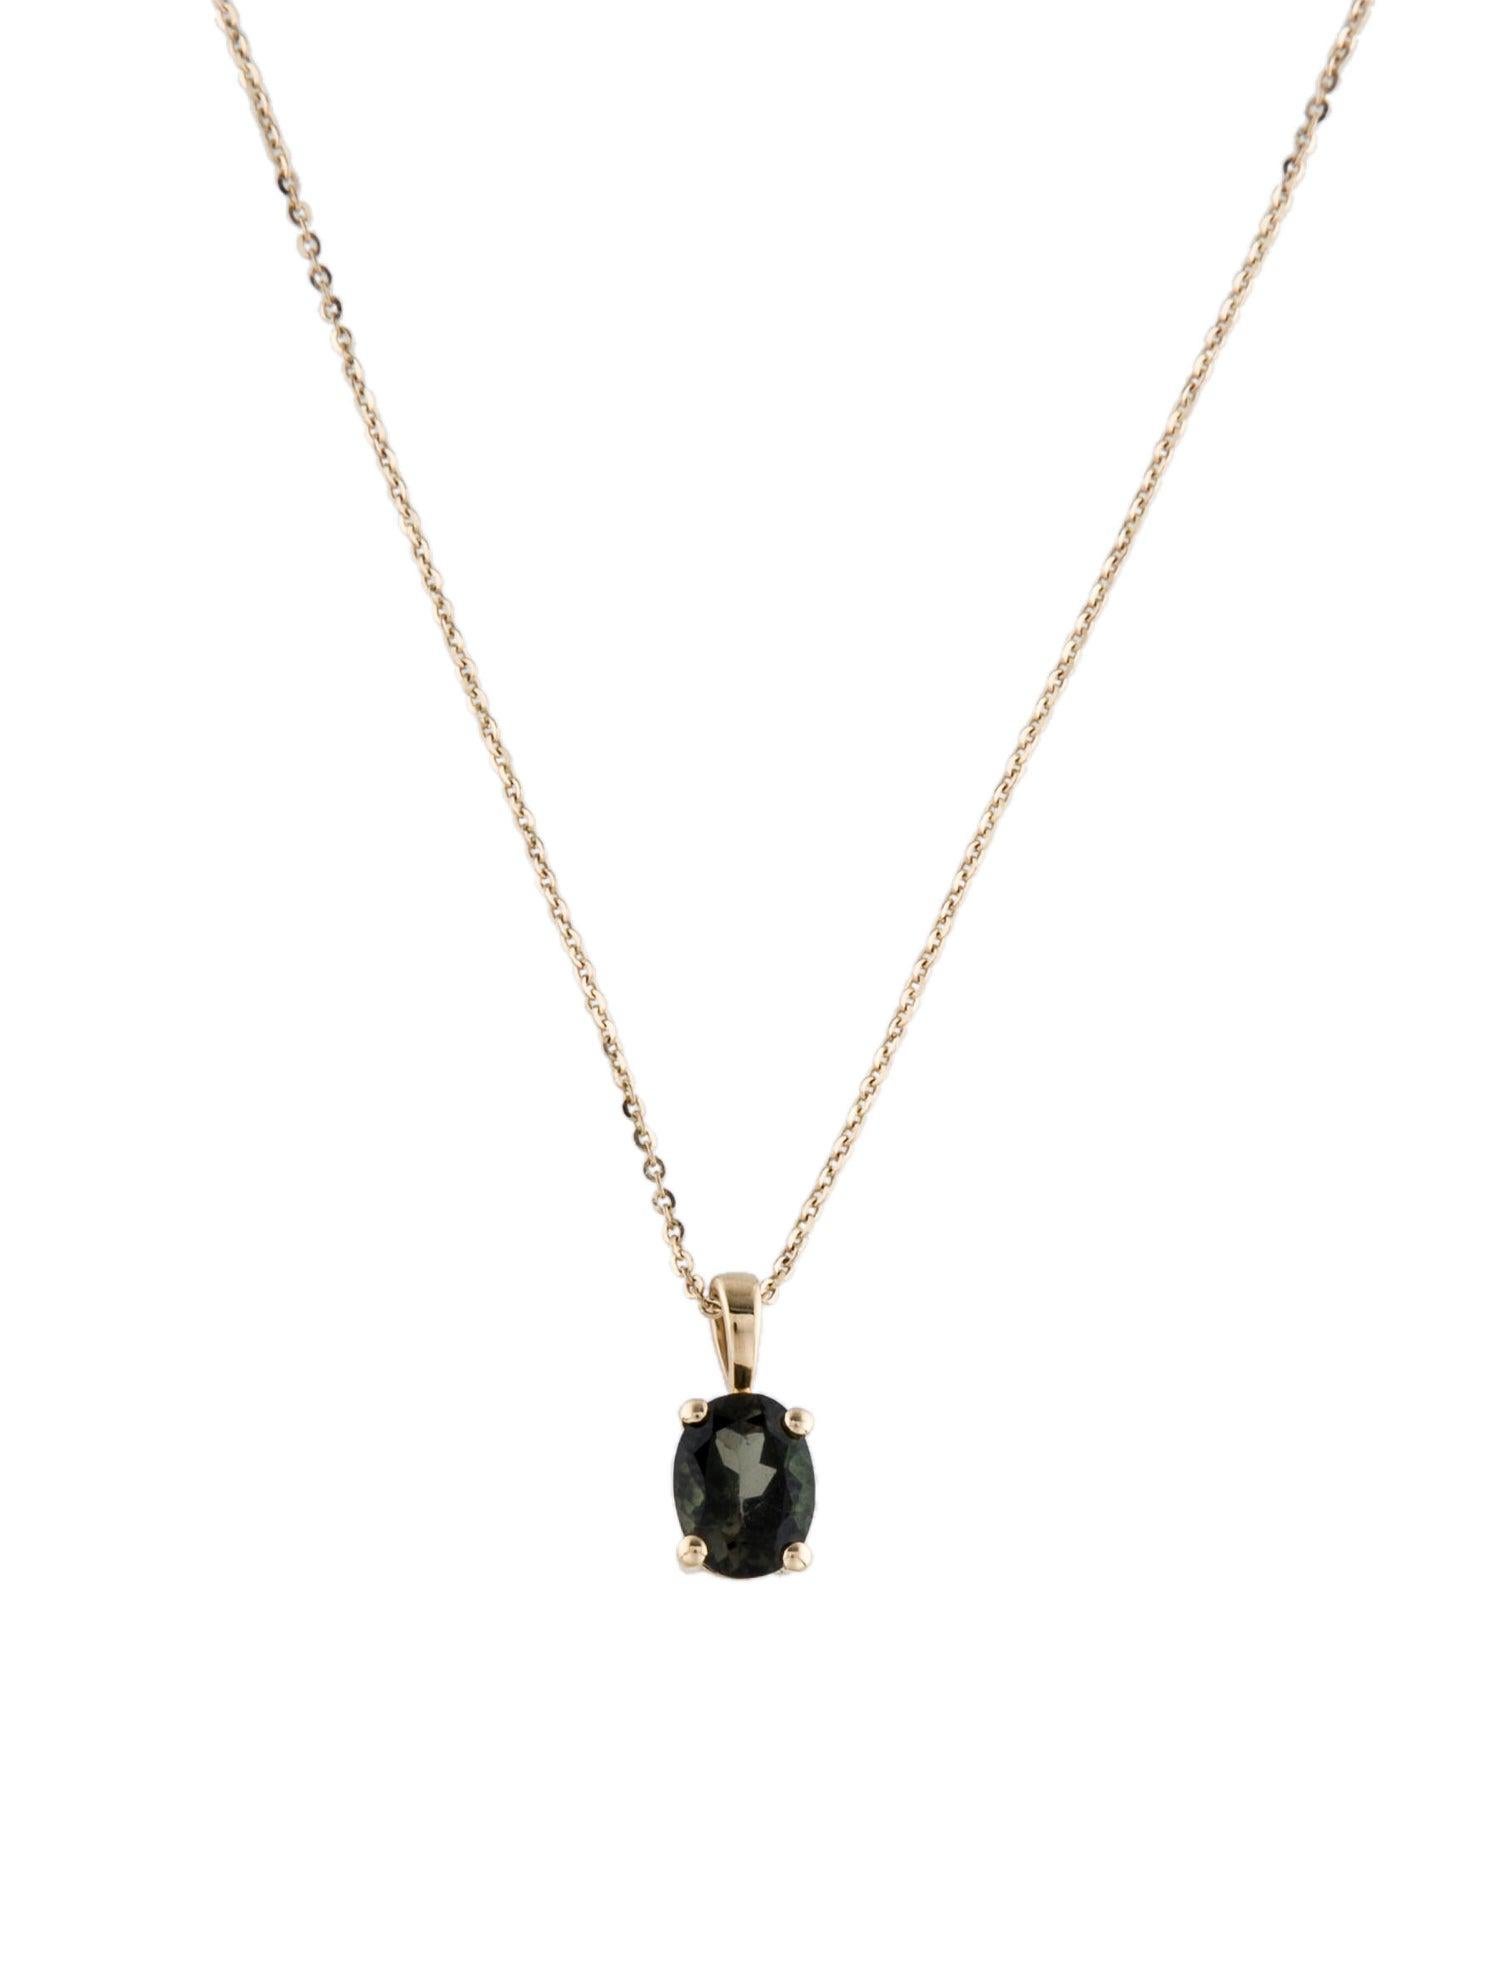 14K 1.27ctw Tourmaline Pendant Necklace - Exquisite Gemstone Statement Piece In New Condition For Sale In Holtsville, NY